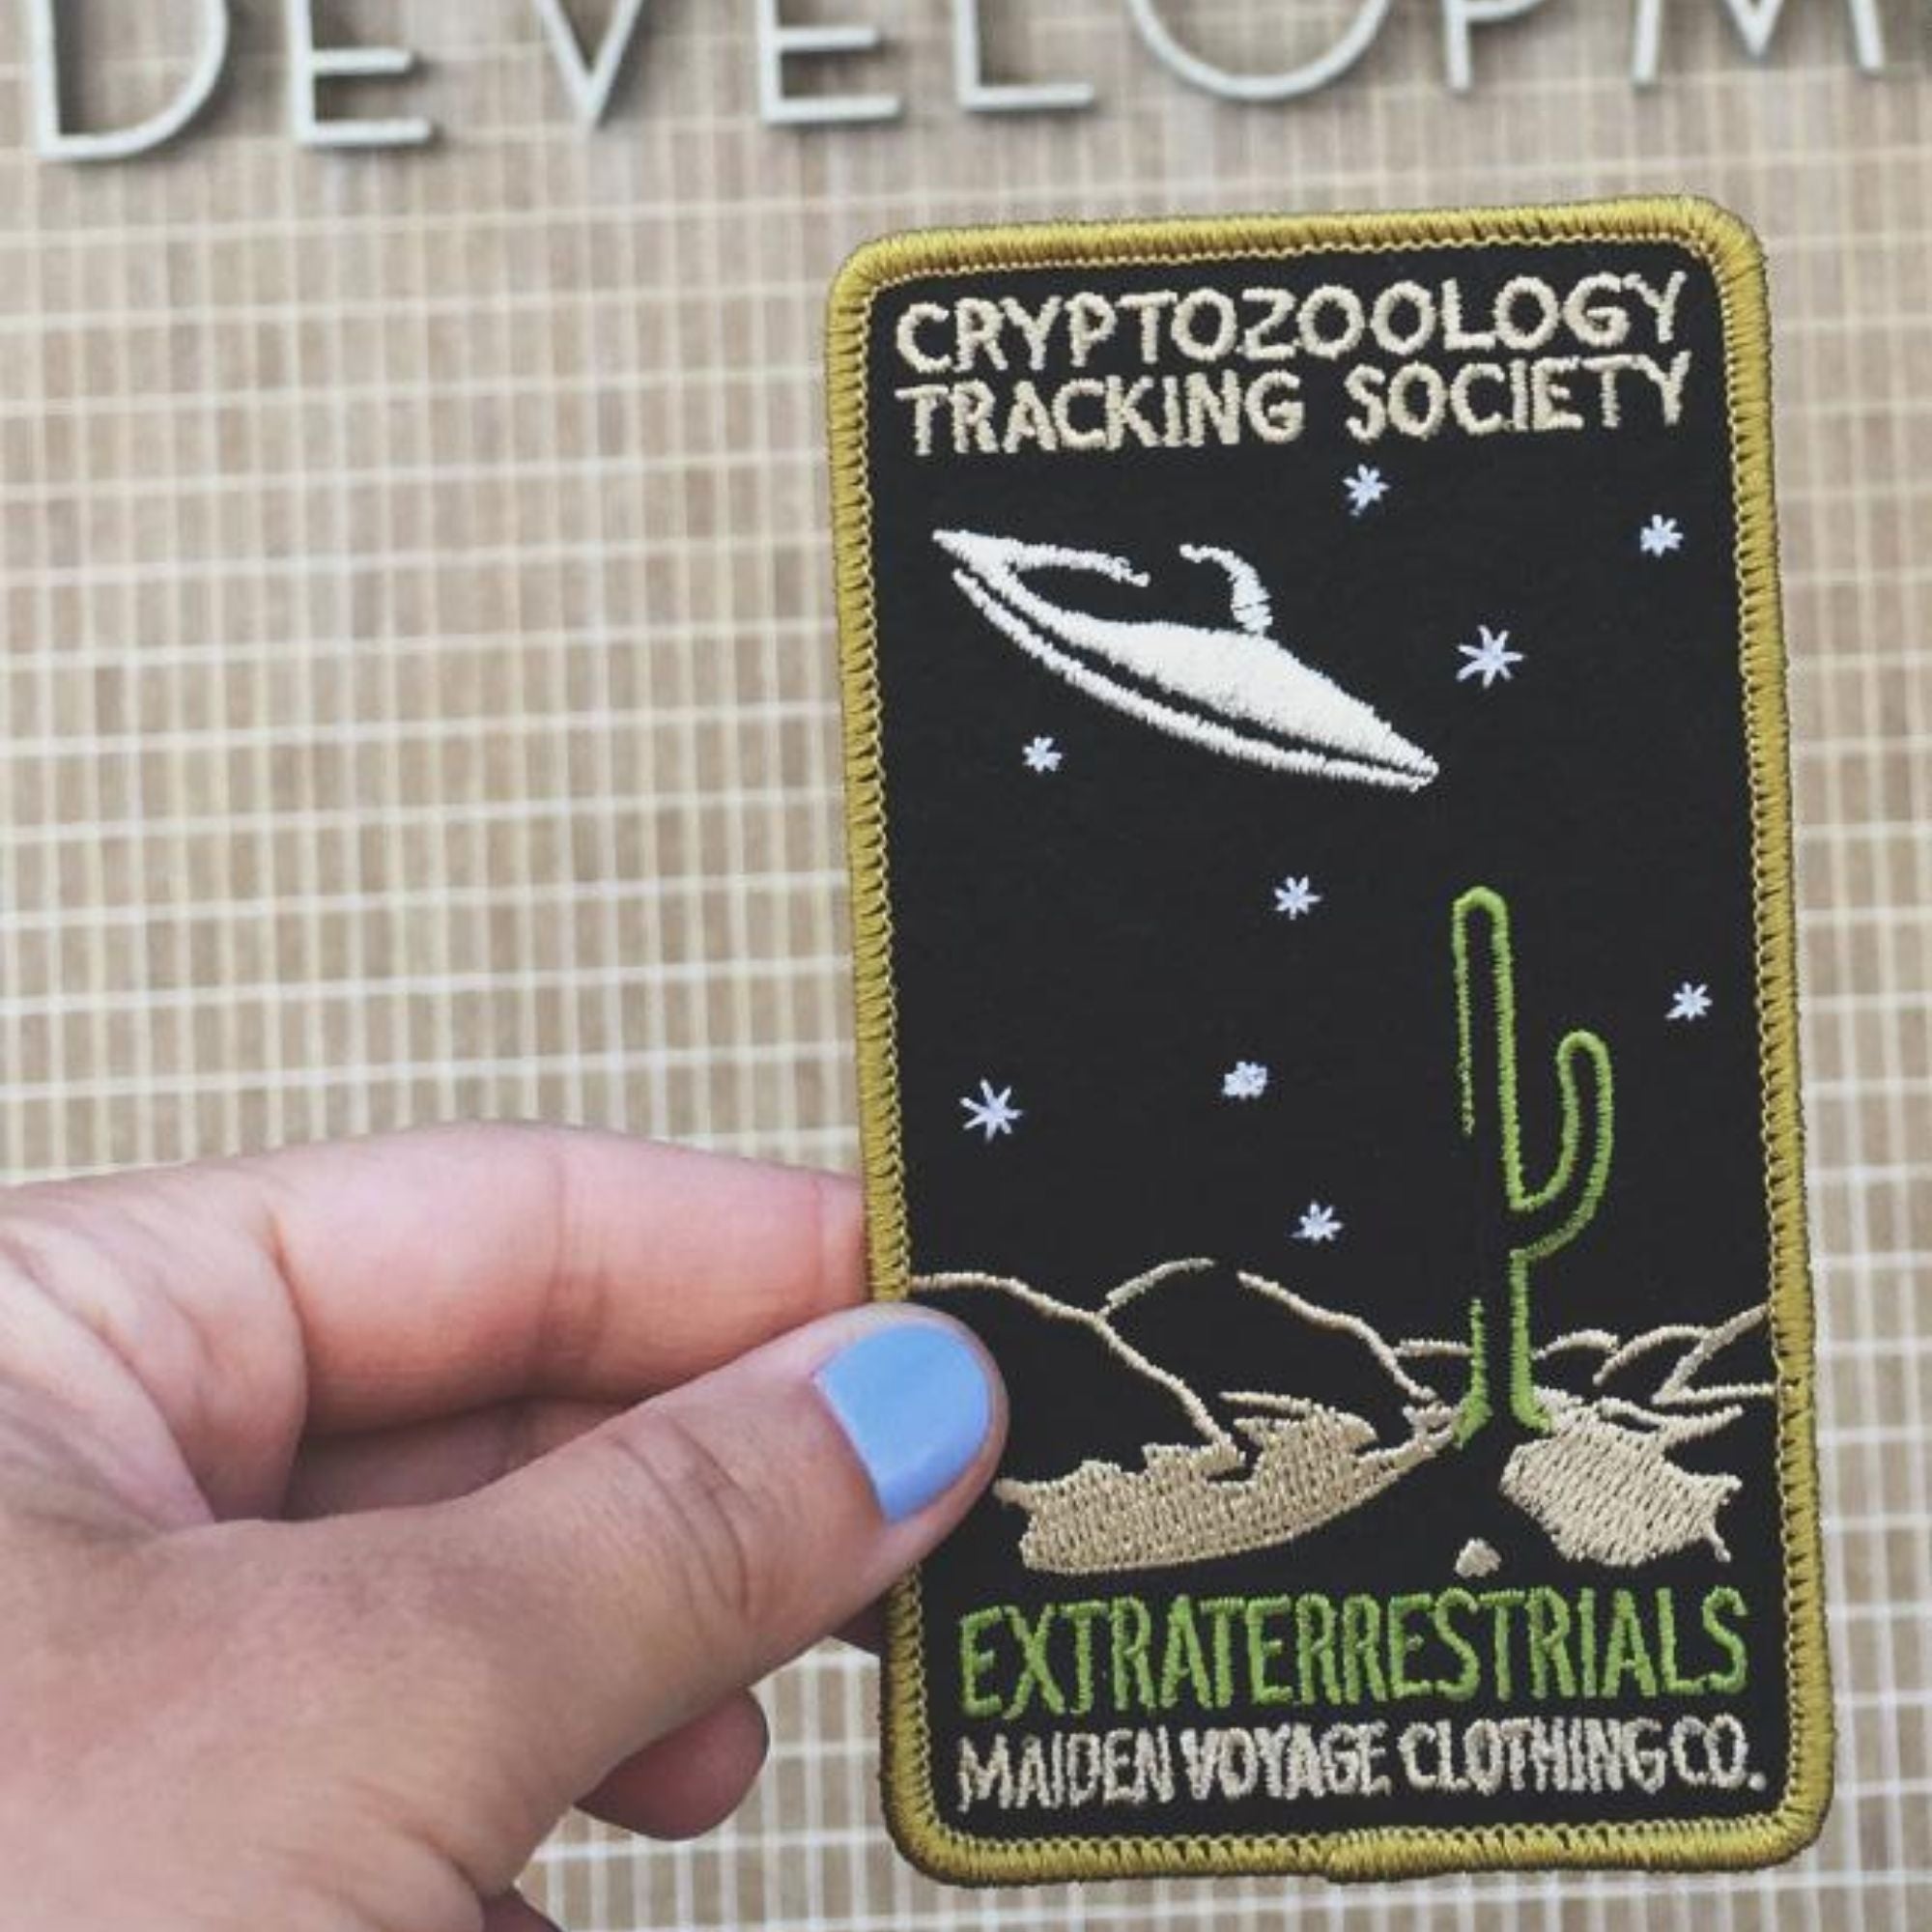 Extraterrestrials Patch - Cryptozoology Tracking Society - Harold&Charles